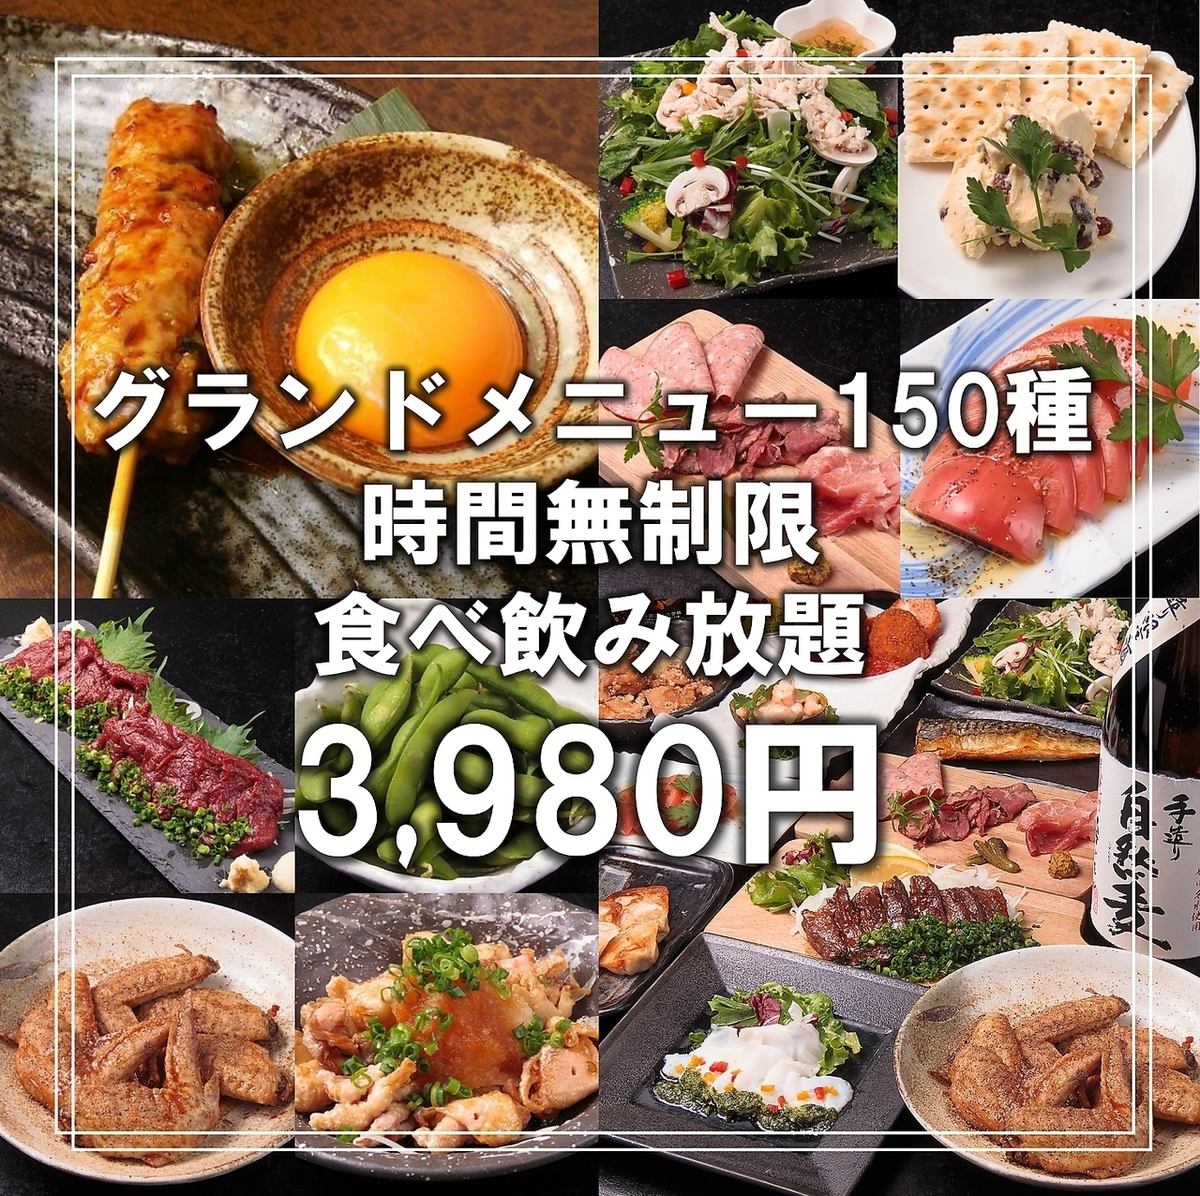 3,980 yen excluding tax [Unlimited time! All-you-can-eat and drink from ALL menus] Includes sashimi platter!